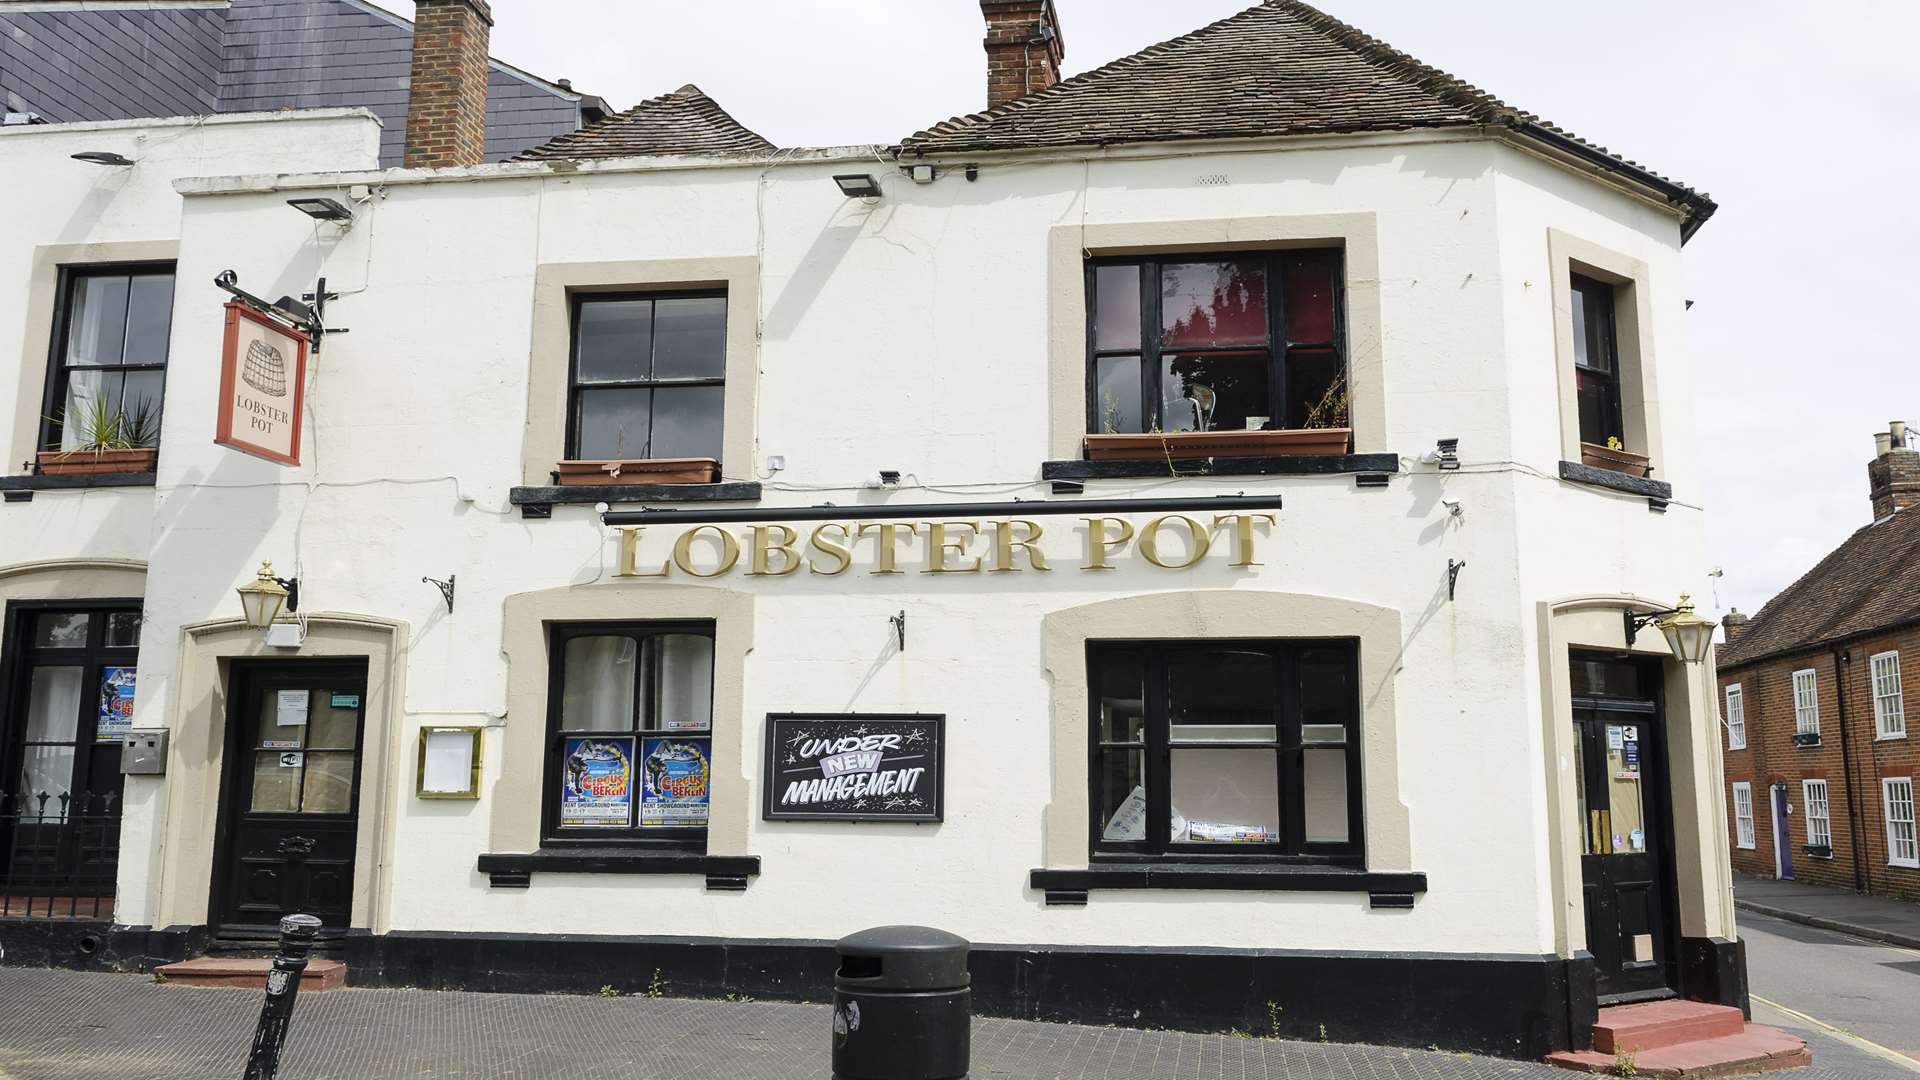 The Lobster Pot in West Malling High Street